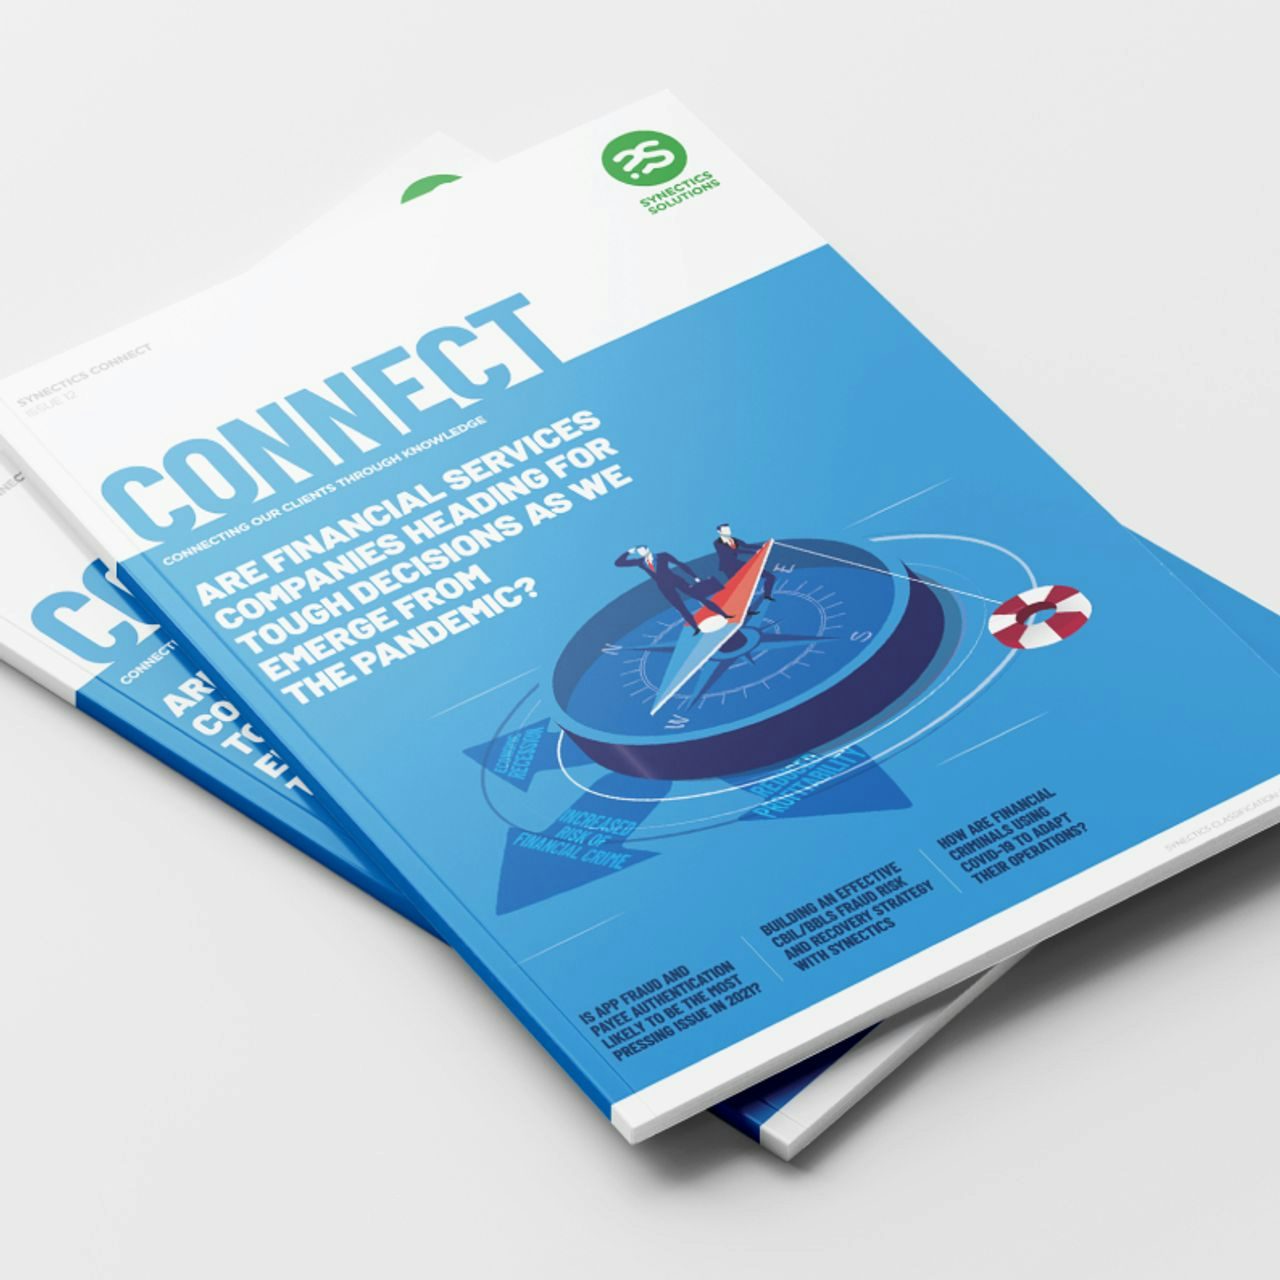 Cover of 'CONNECT' magazine with a focus on financial services resilience post-pandemic, featuring a bold graphic of a compass on a sea with paper boats.